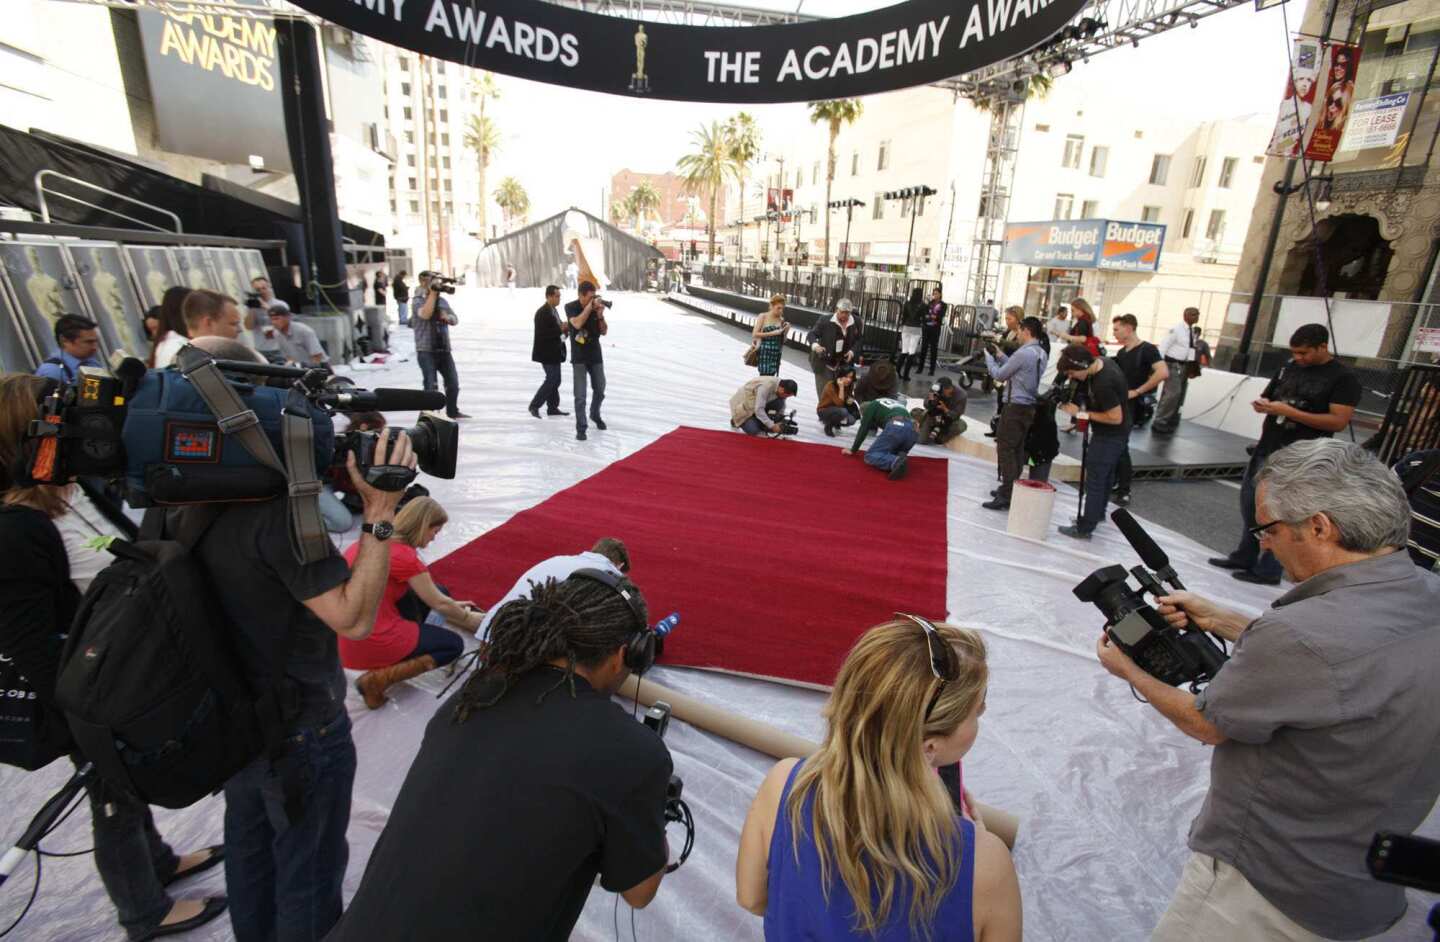 Members of the media crowd around for a shot as workers roll out the red carpet.